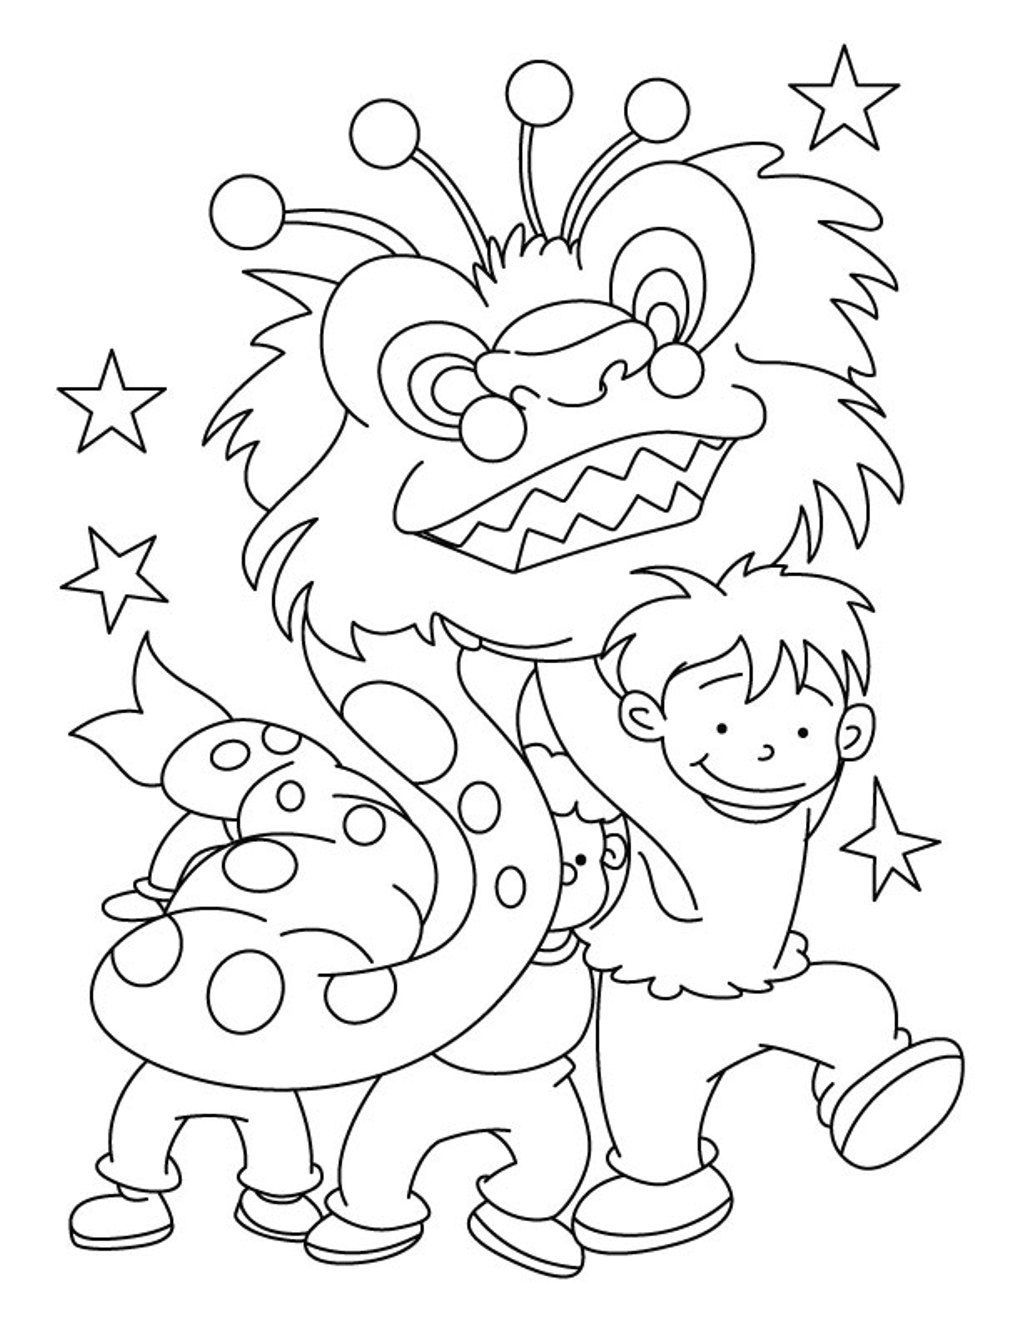 Chinese New Year Coloring Pages | New year coloring pages ...